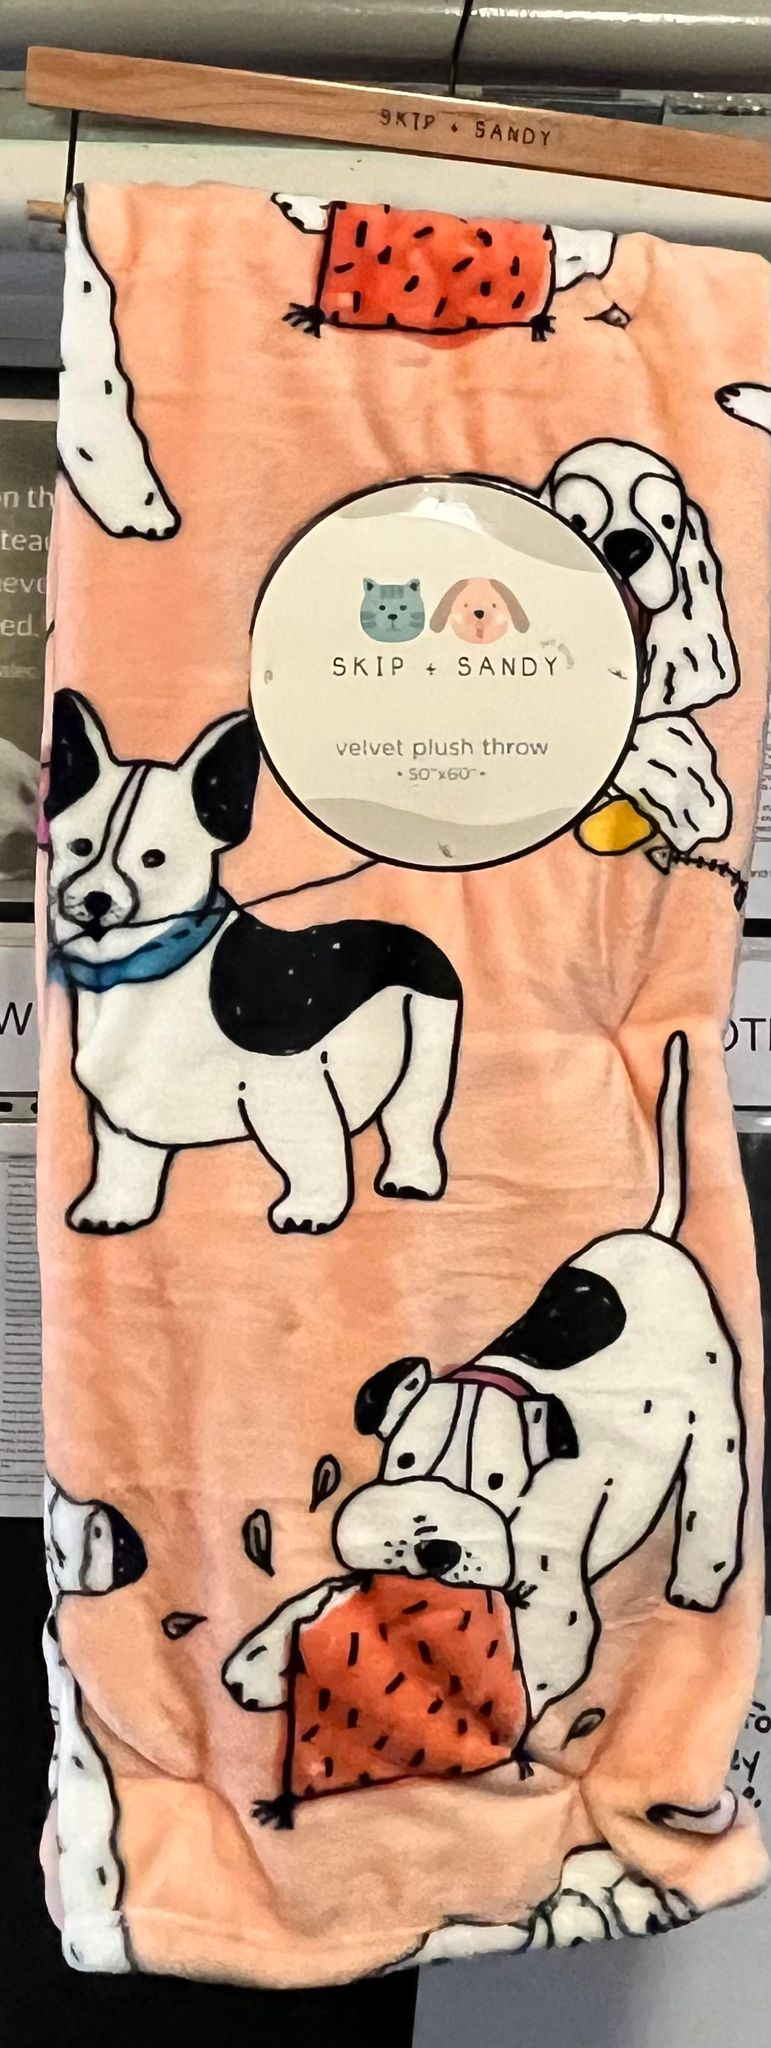 Image of Blanket with dogs on it